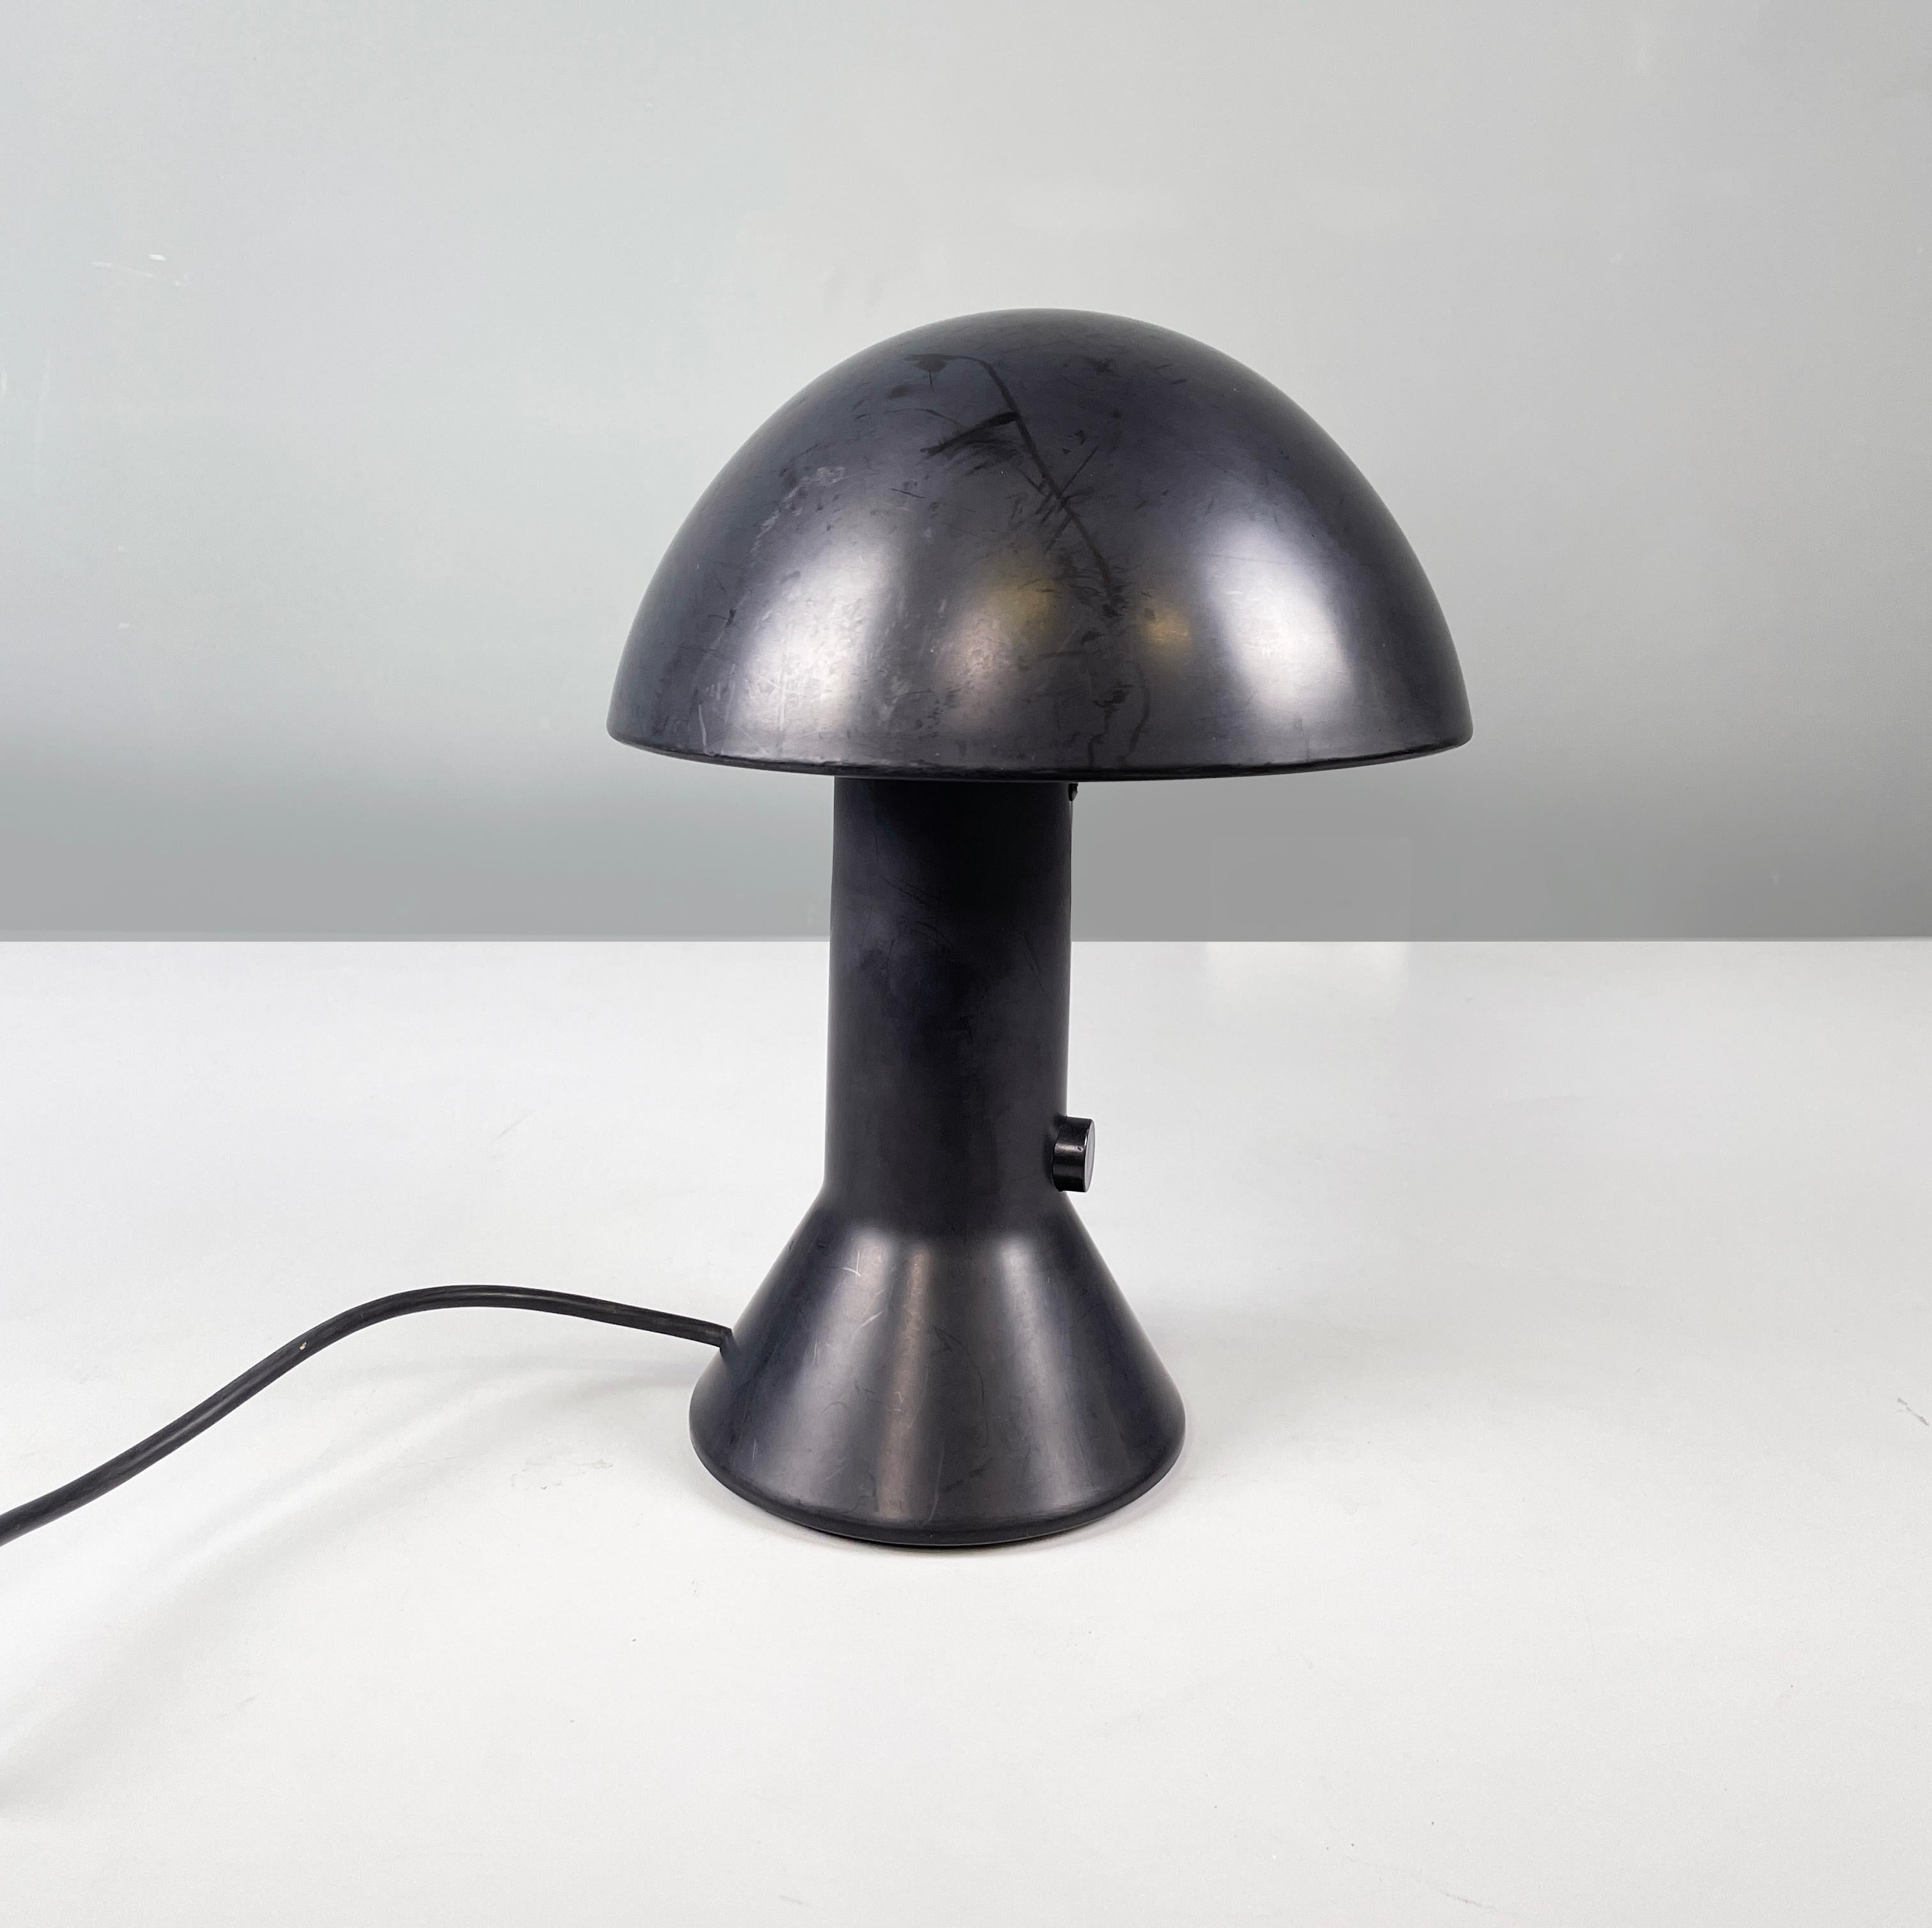 Italian modern adjustable table lamp Elmetto by Martinelli Luce in black plastic and white metal, 1980s
Table lamp mod. Elmetto with hemisphere diffuser, externally in black plastic and internally in white metal. Thanks to a metal rod placed in the